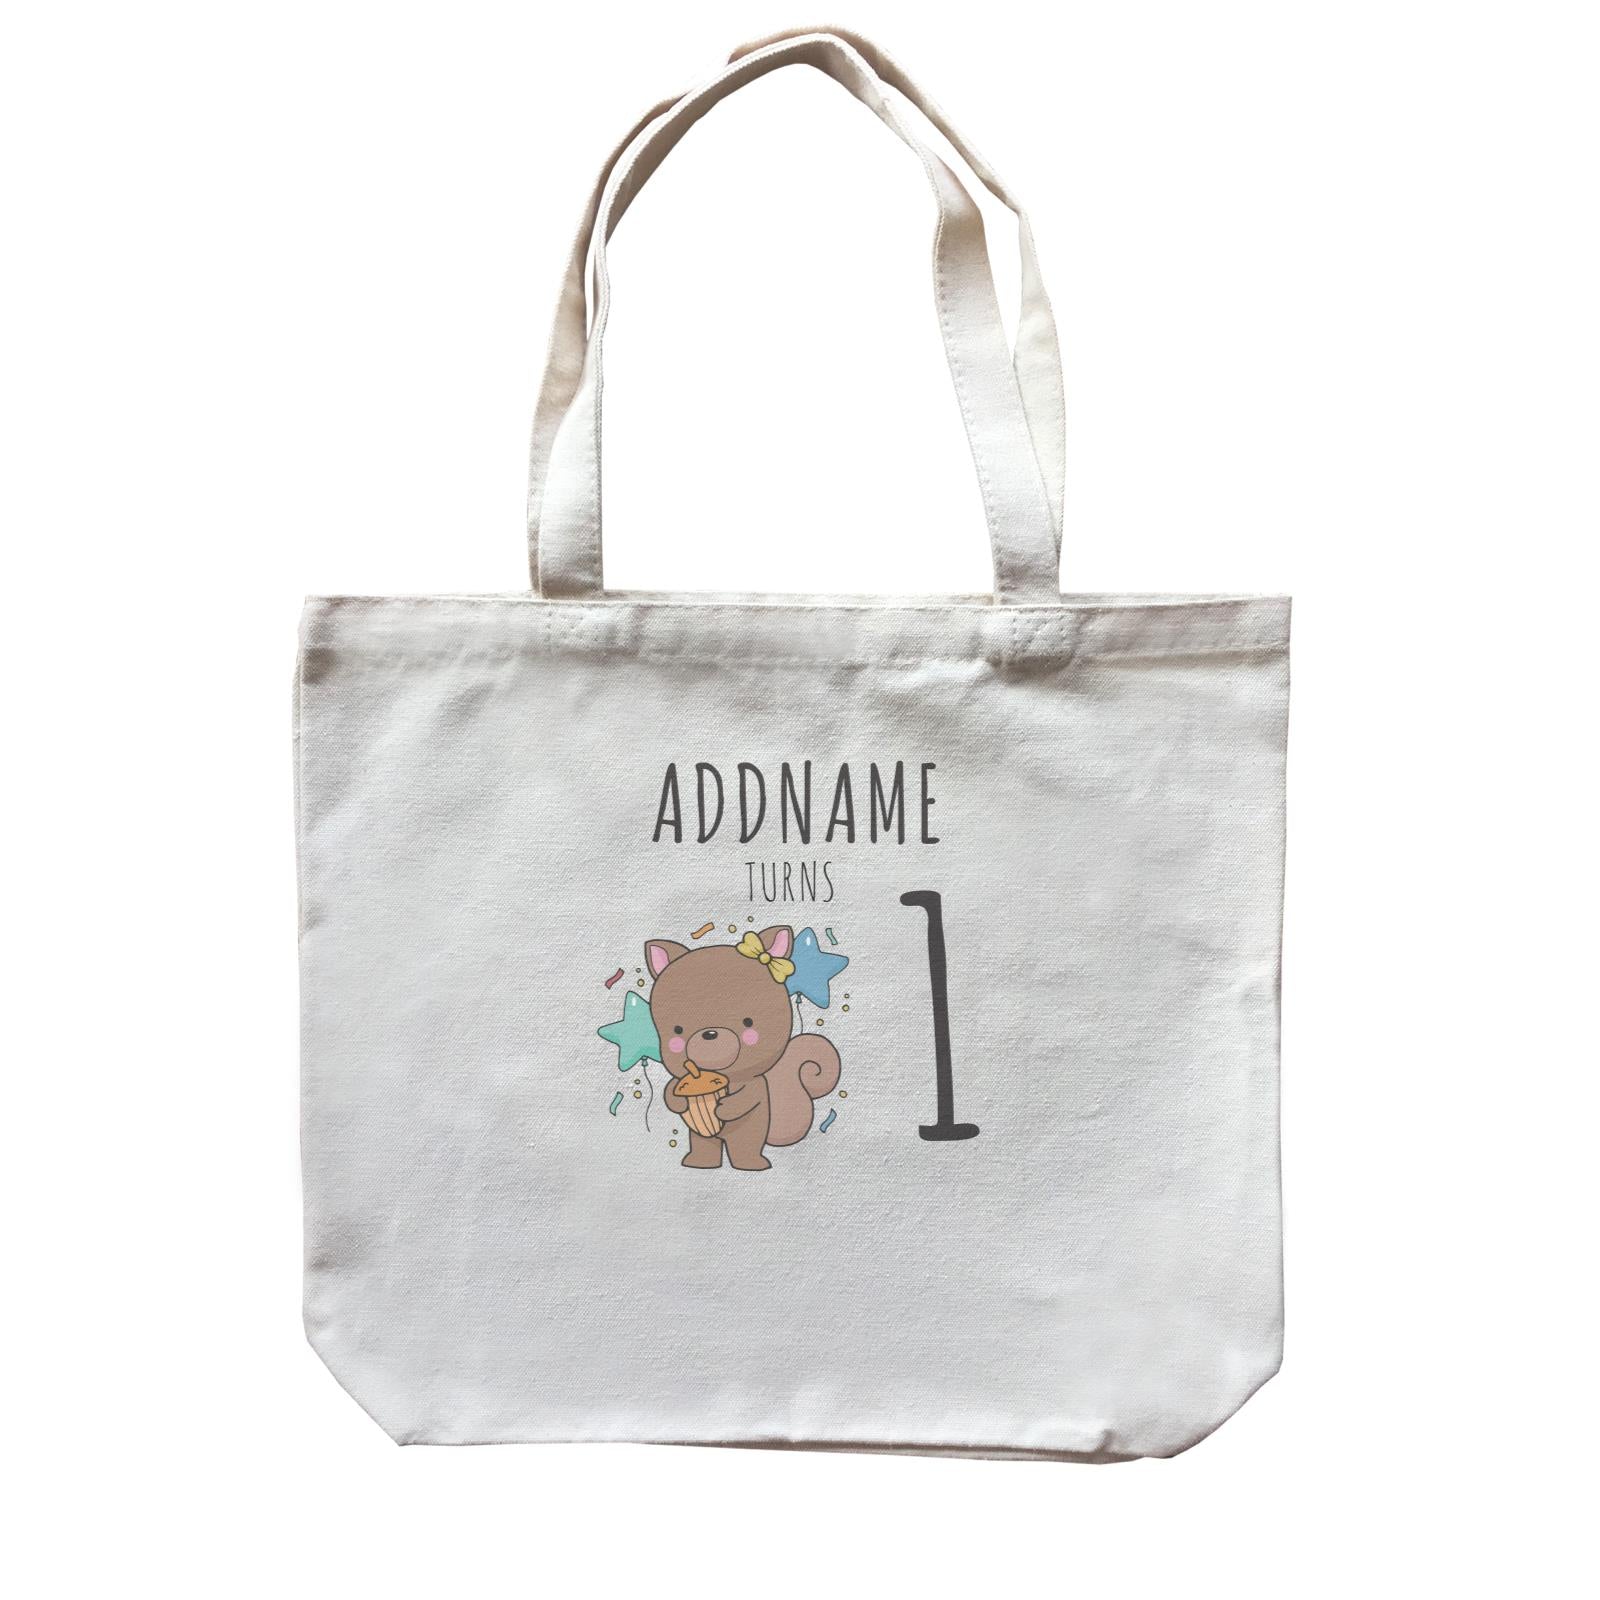 Birthday Sketch Animals Squirrel with Acorn Addname Turns 1 Canvas Bag